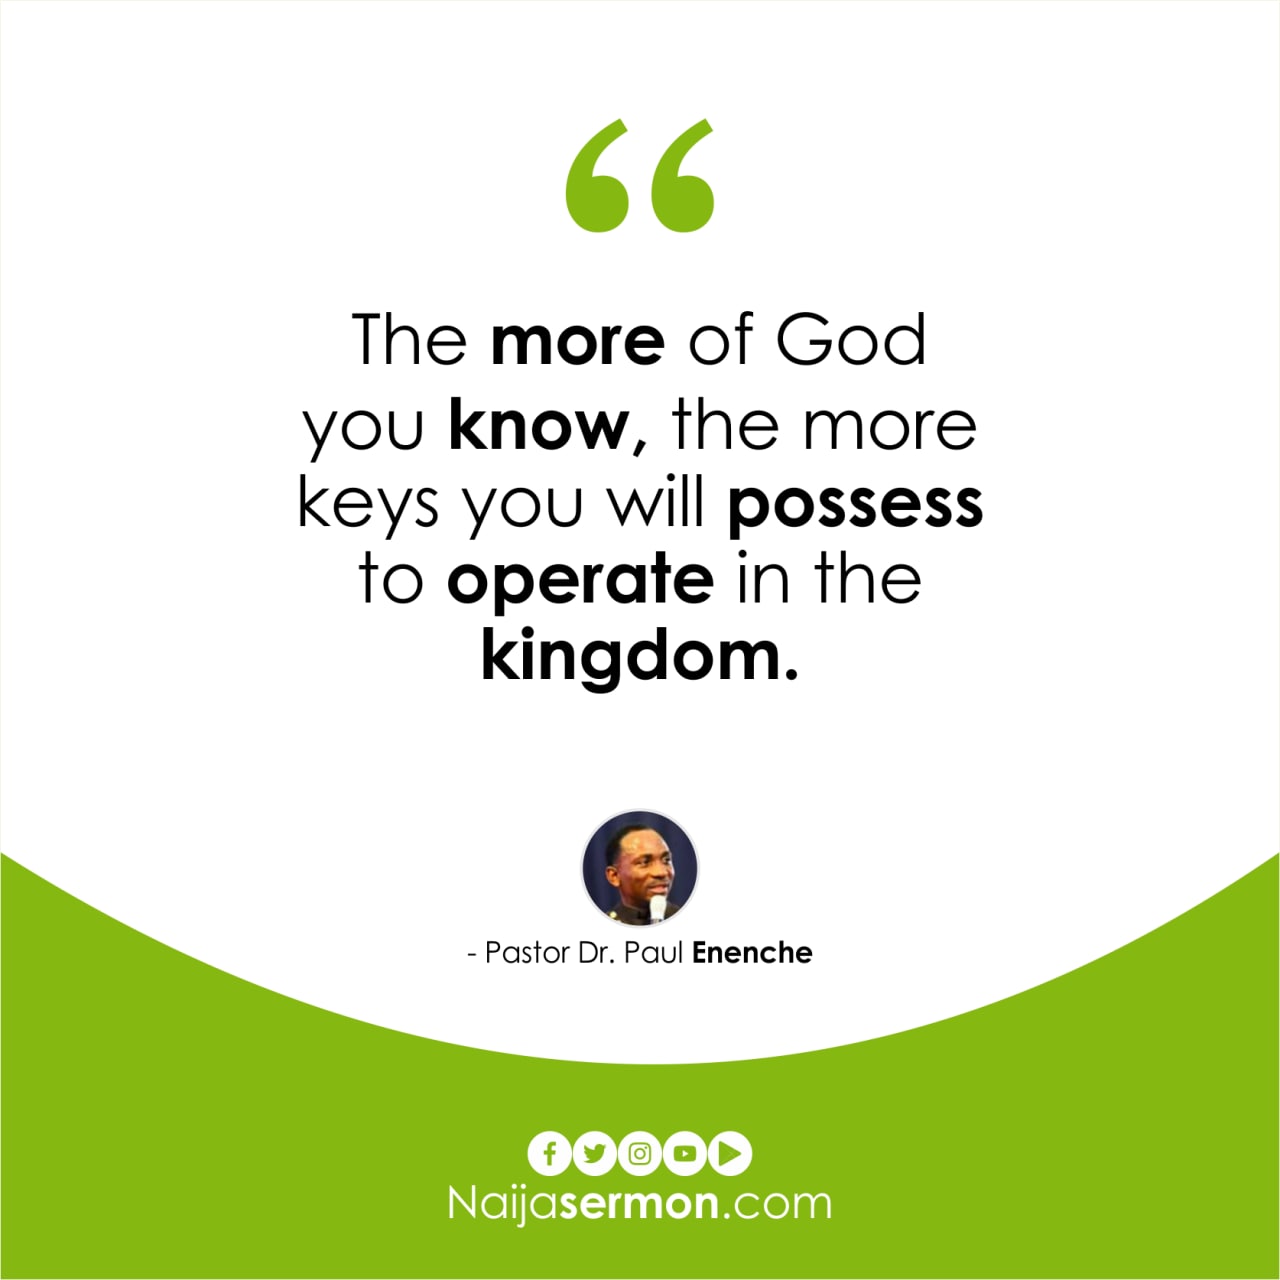 QUOTE OF THE PASTOR BY DR. PAUL ENENCHE 2